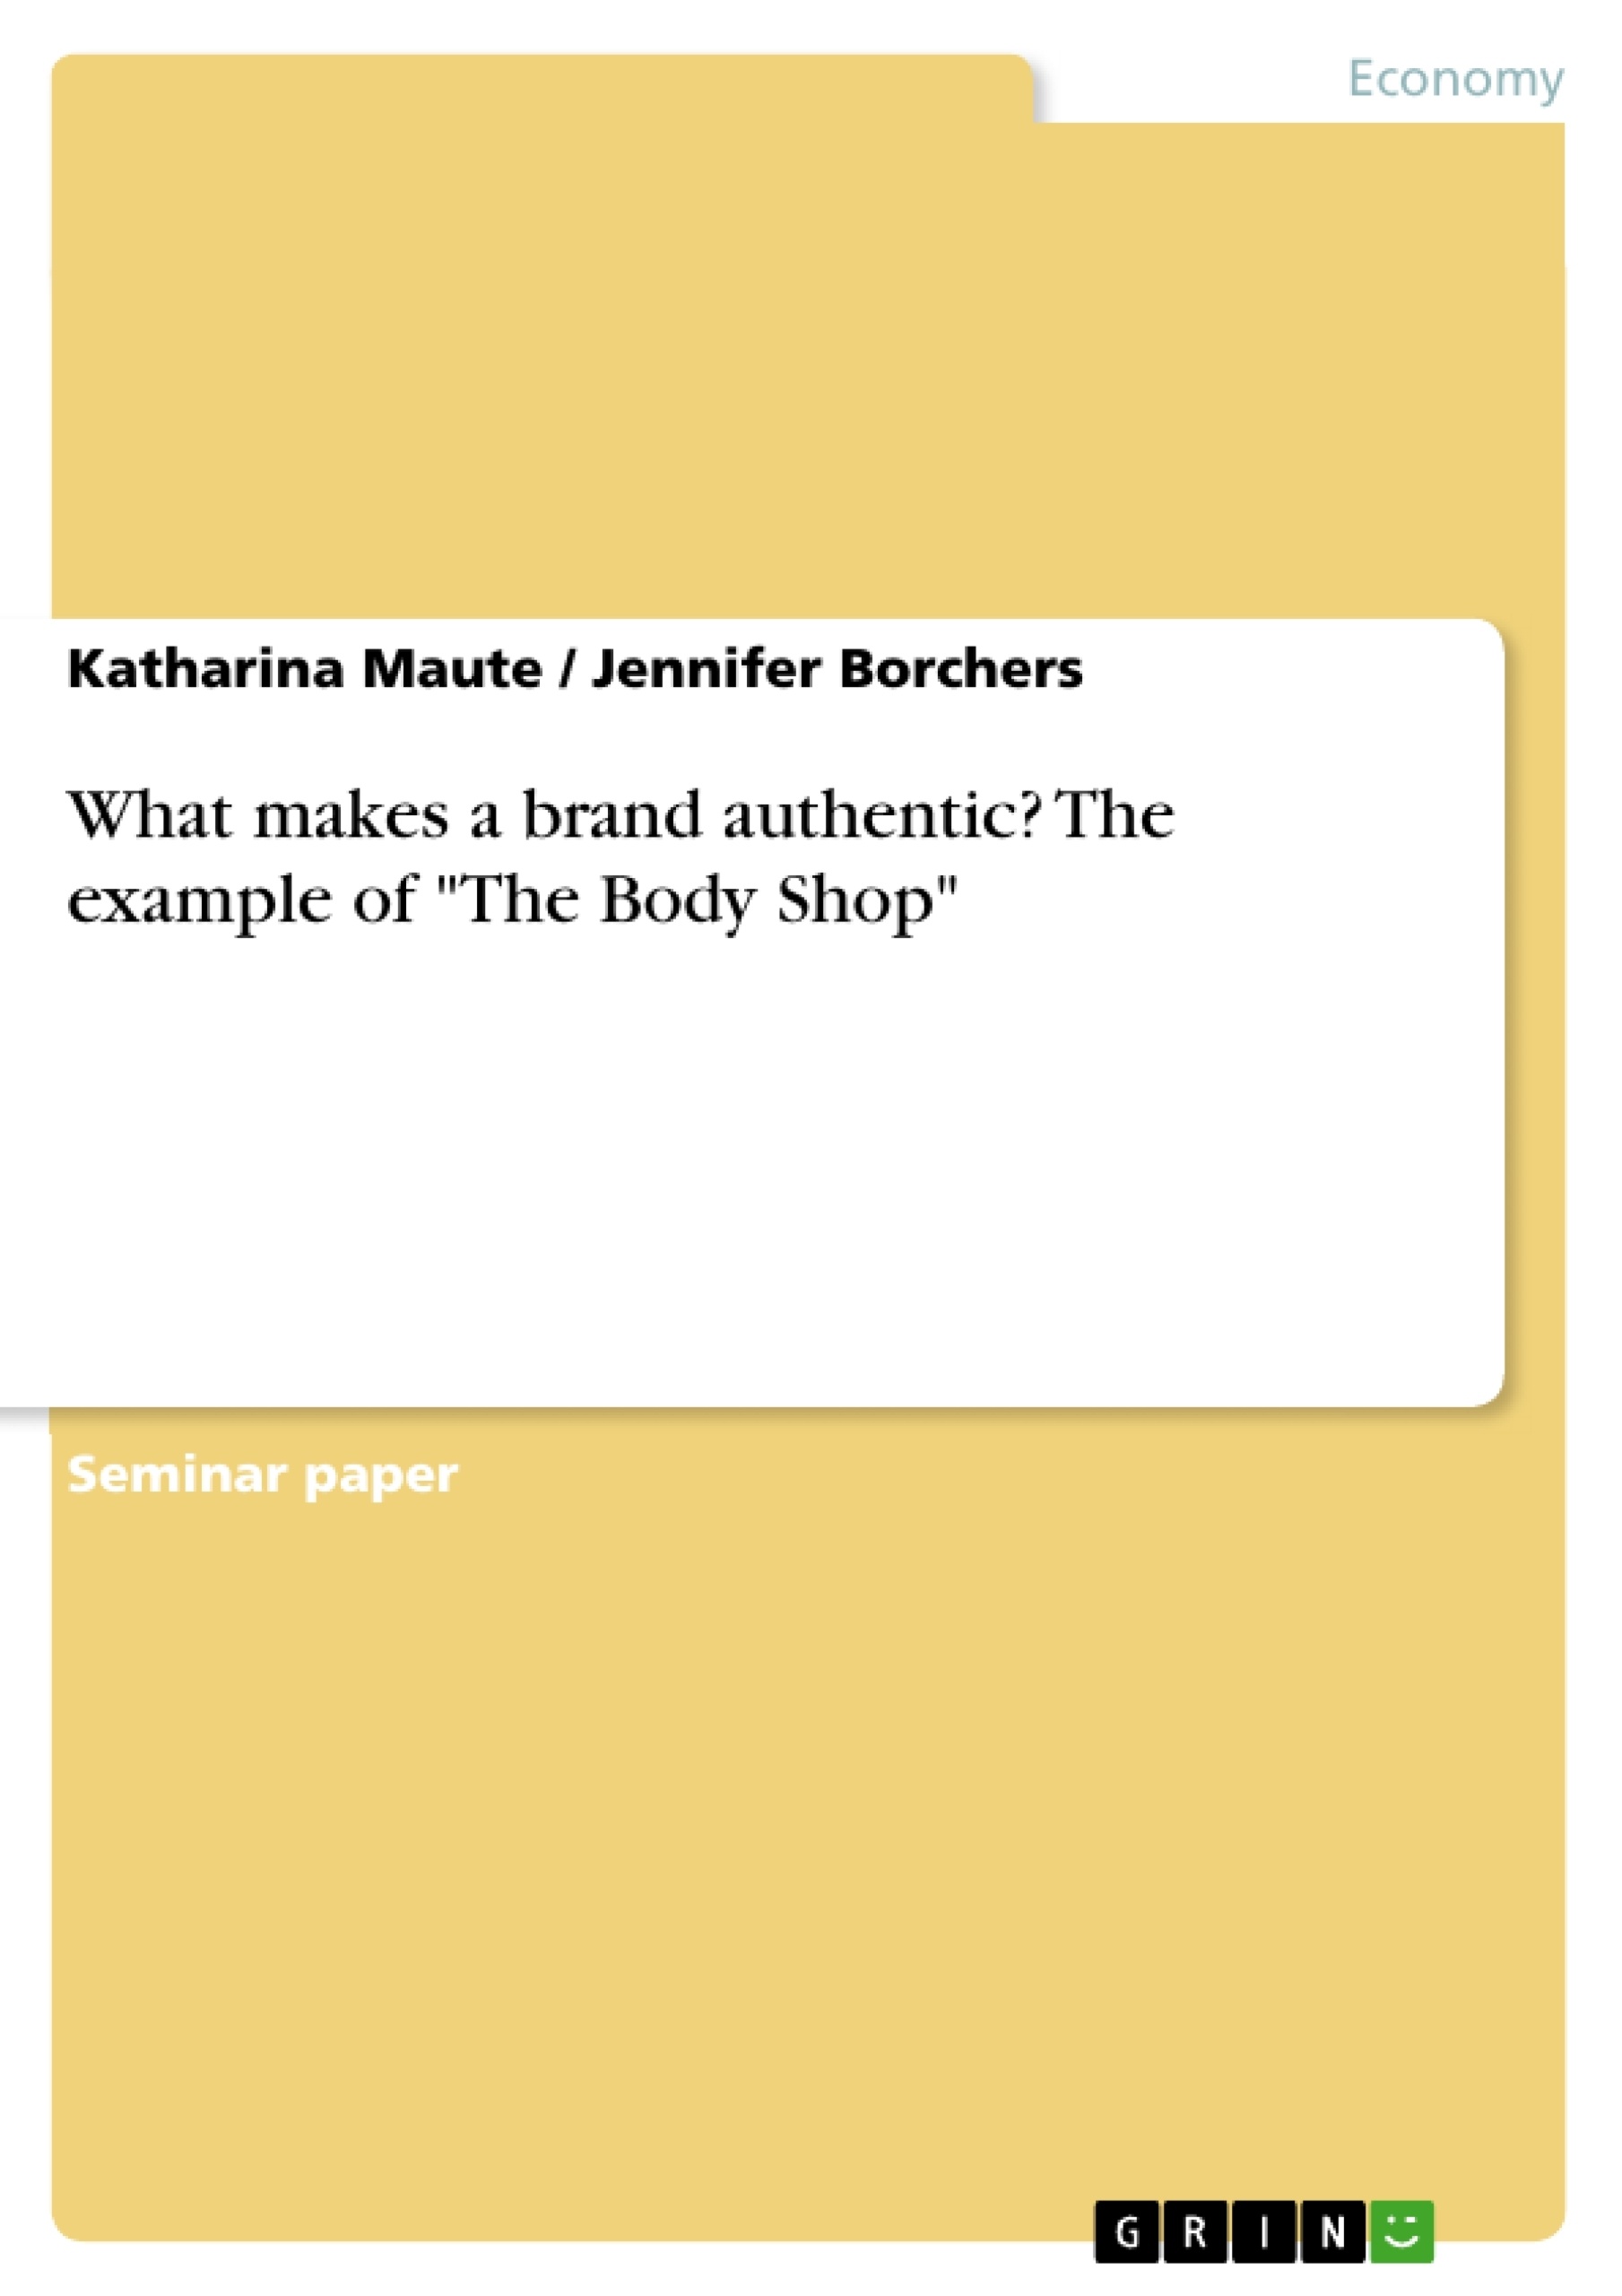 Titre: What makes a brand authentic? The example of "The Body Shop"